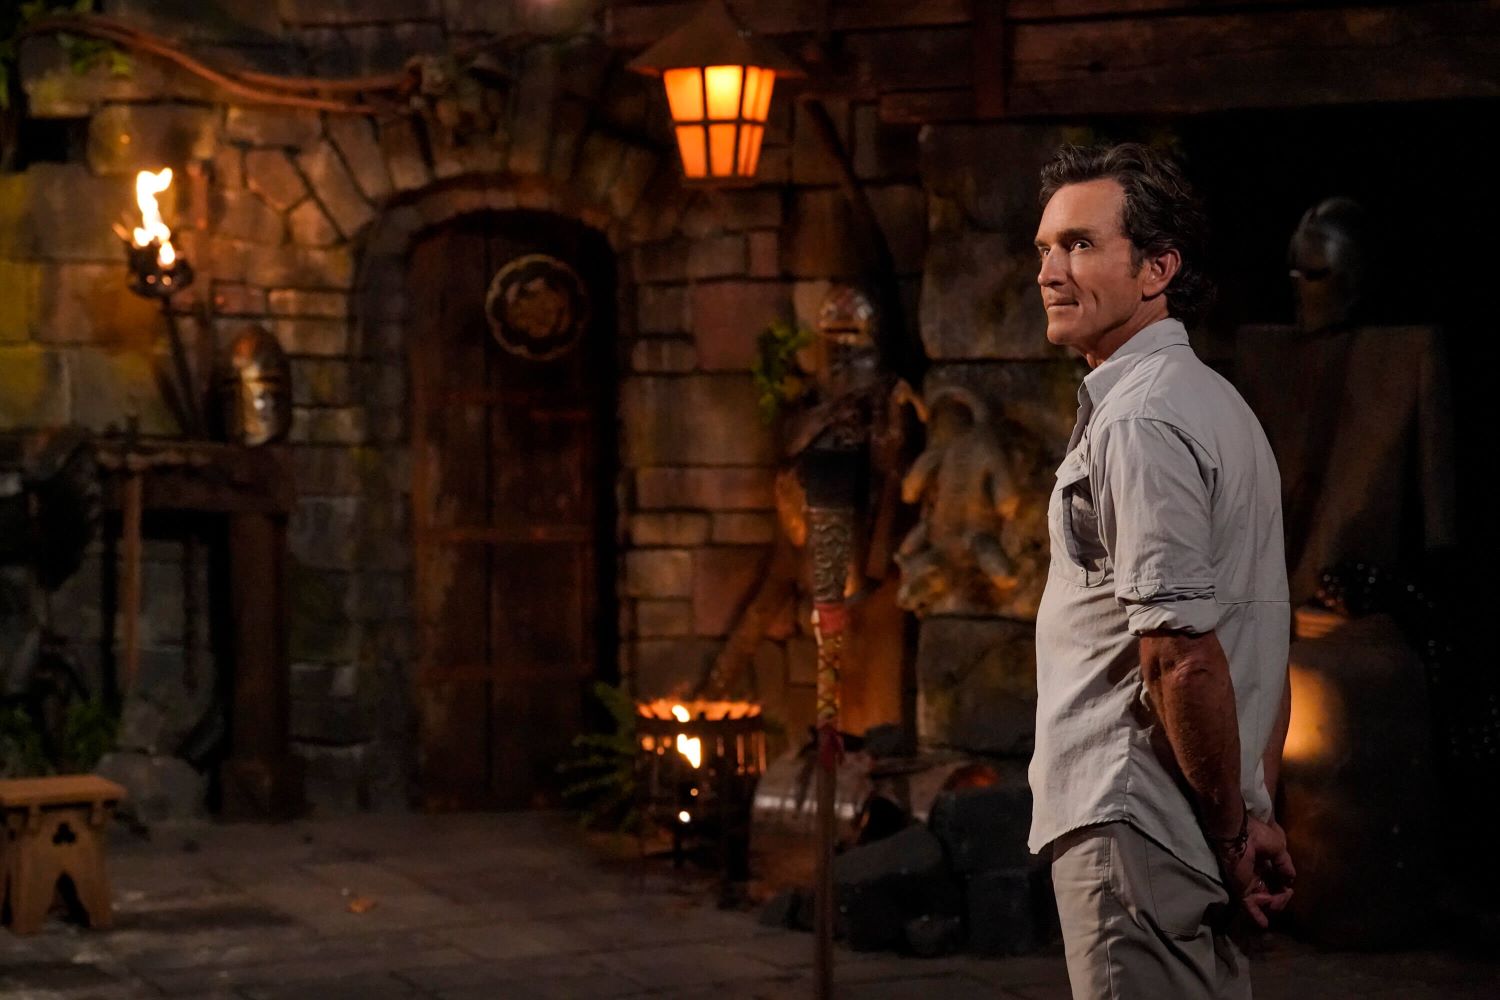 Jeff Probst, who has hosted all 44 seasons of 'Survivor' on CBS, appears at Tribal Council wearing a light gray button-up shirt and tan pants.